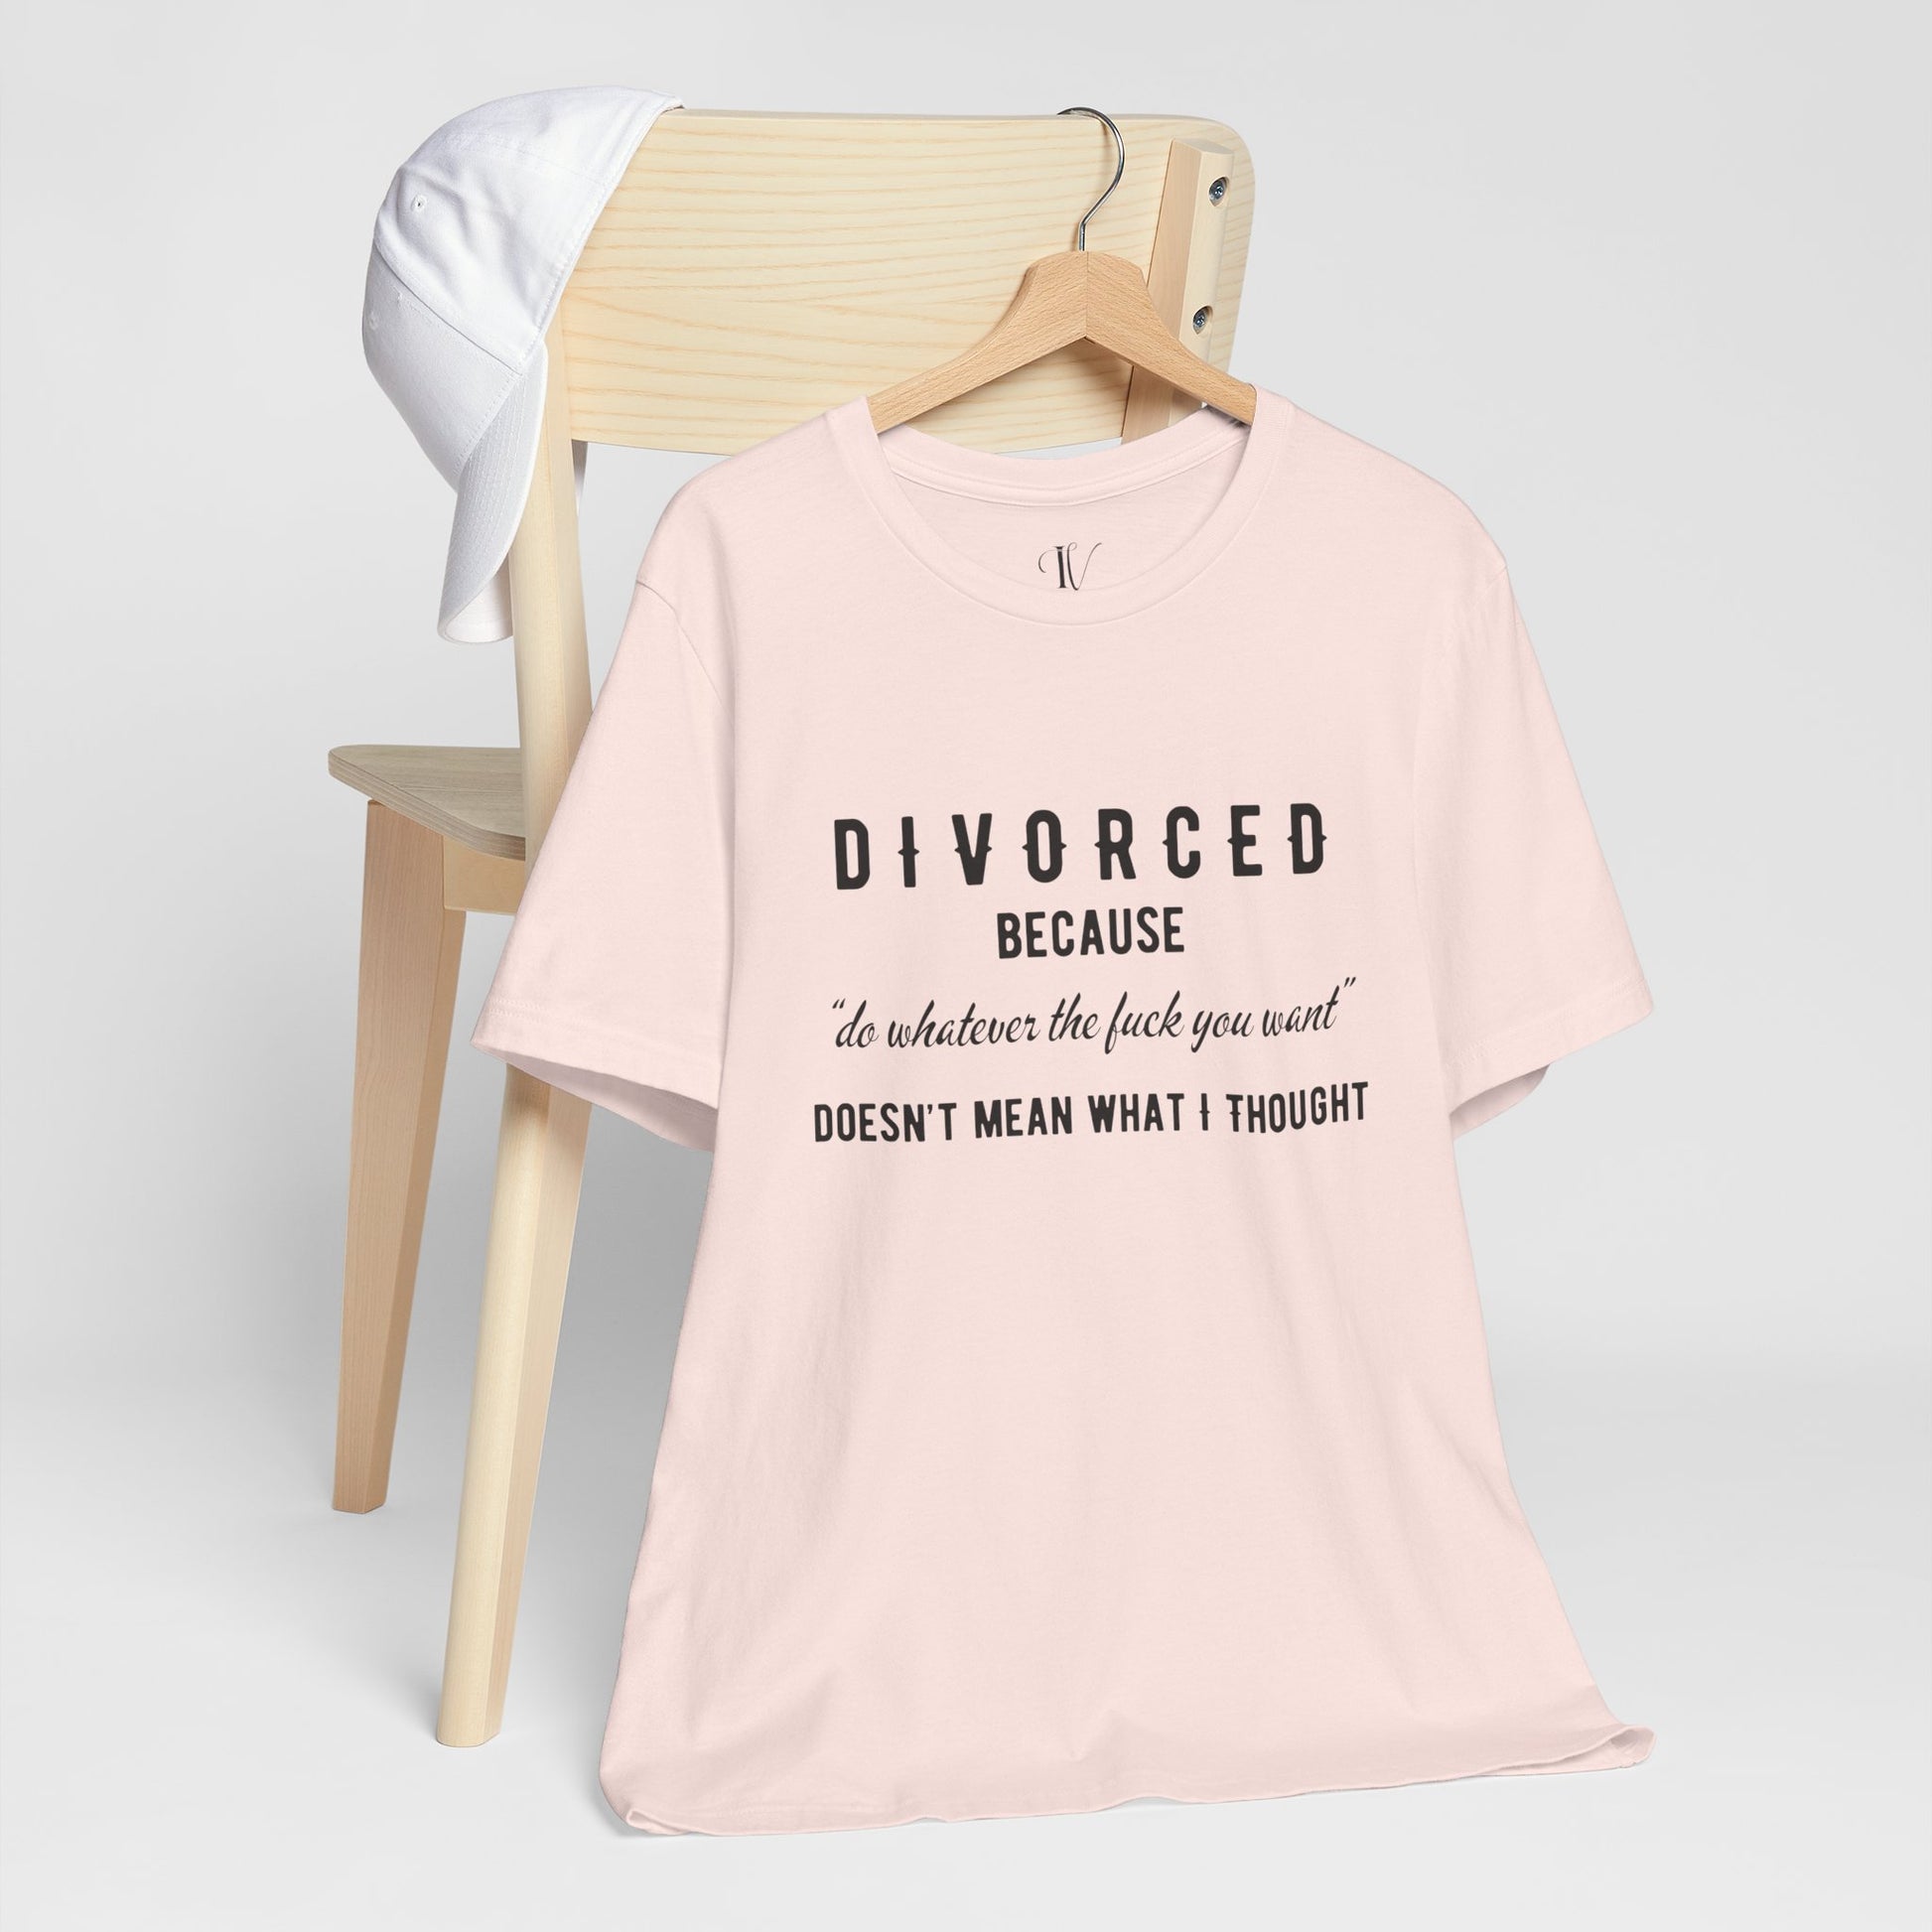 Divorced Shirt - Funny Divorce Party Gift for Ex-Husband or Ex-Wife T-Shirt Soft Pink XS 